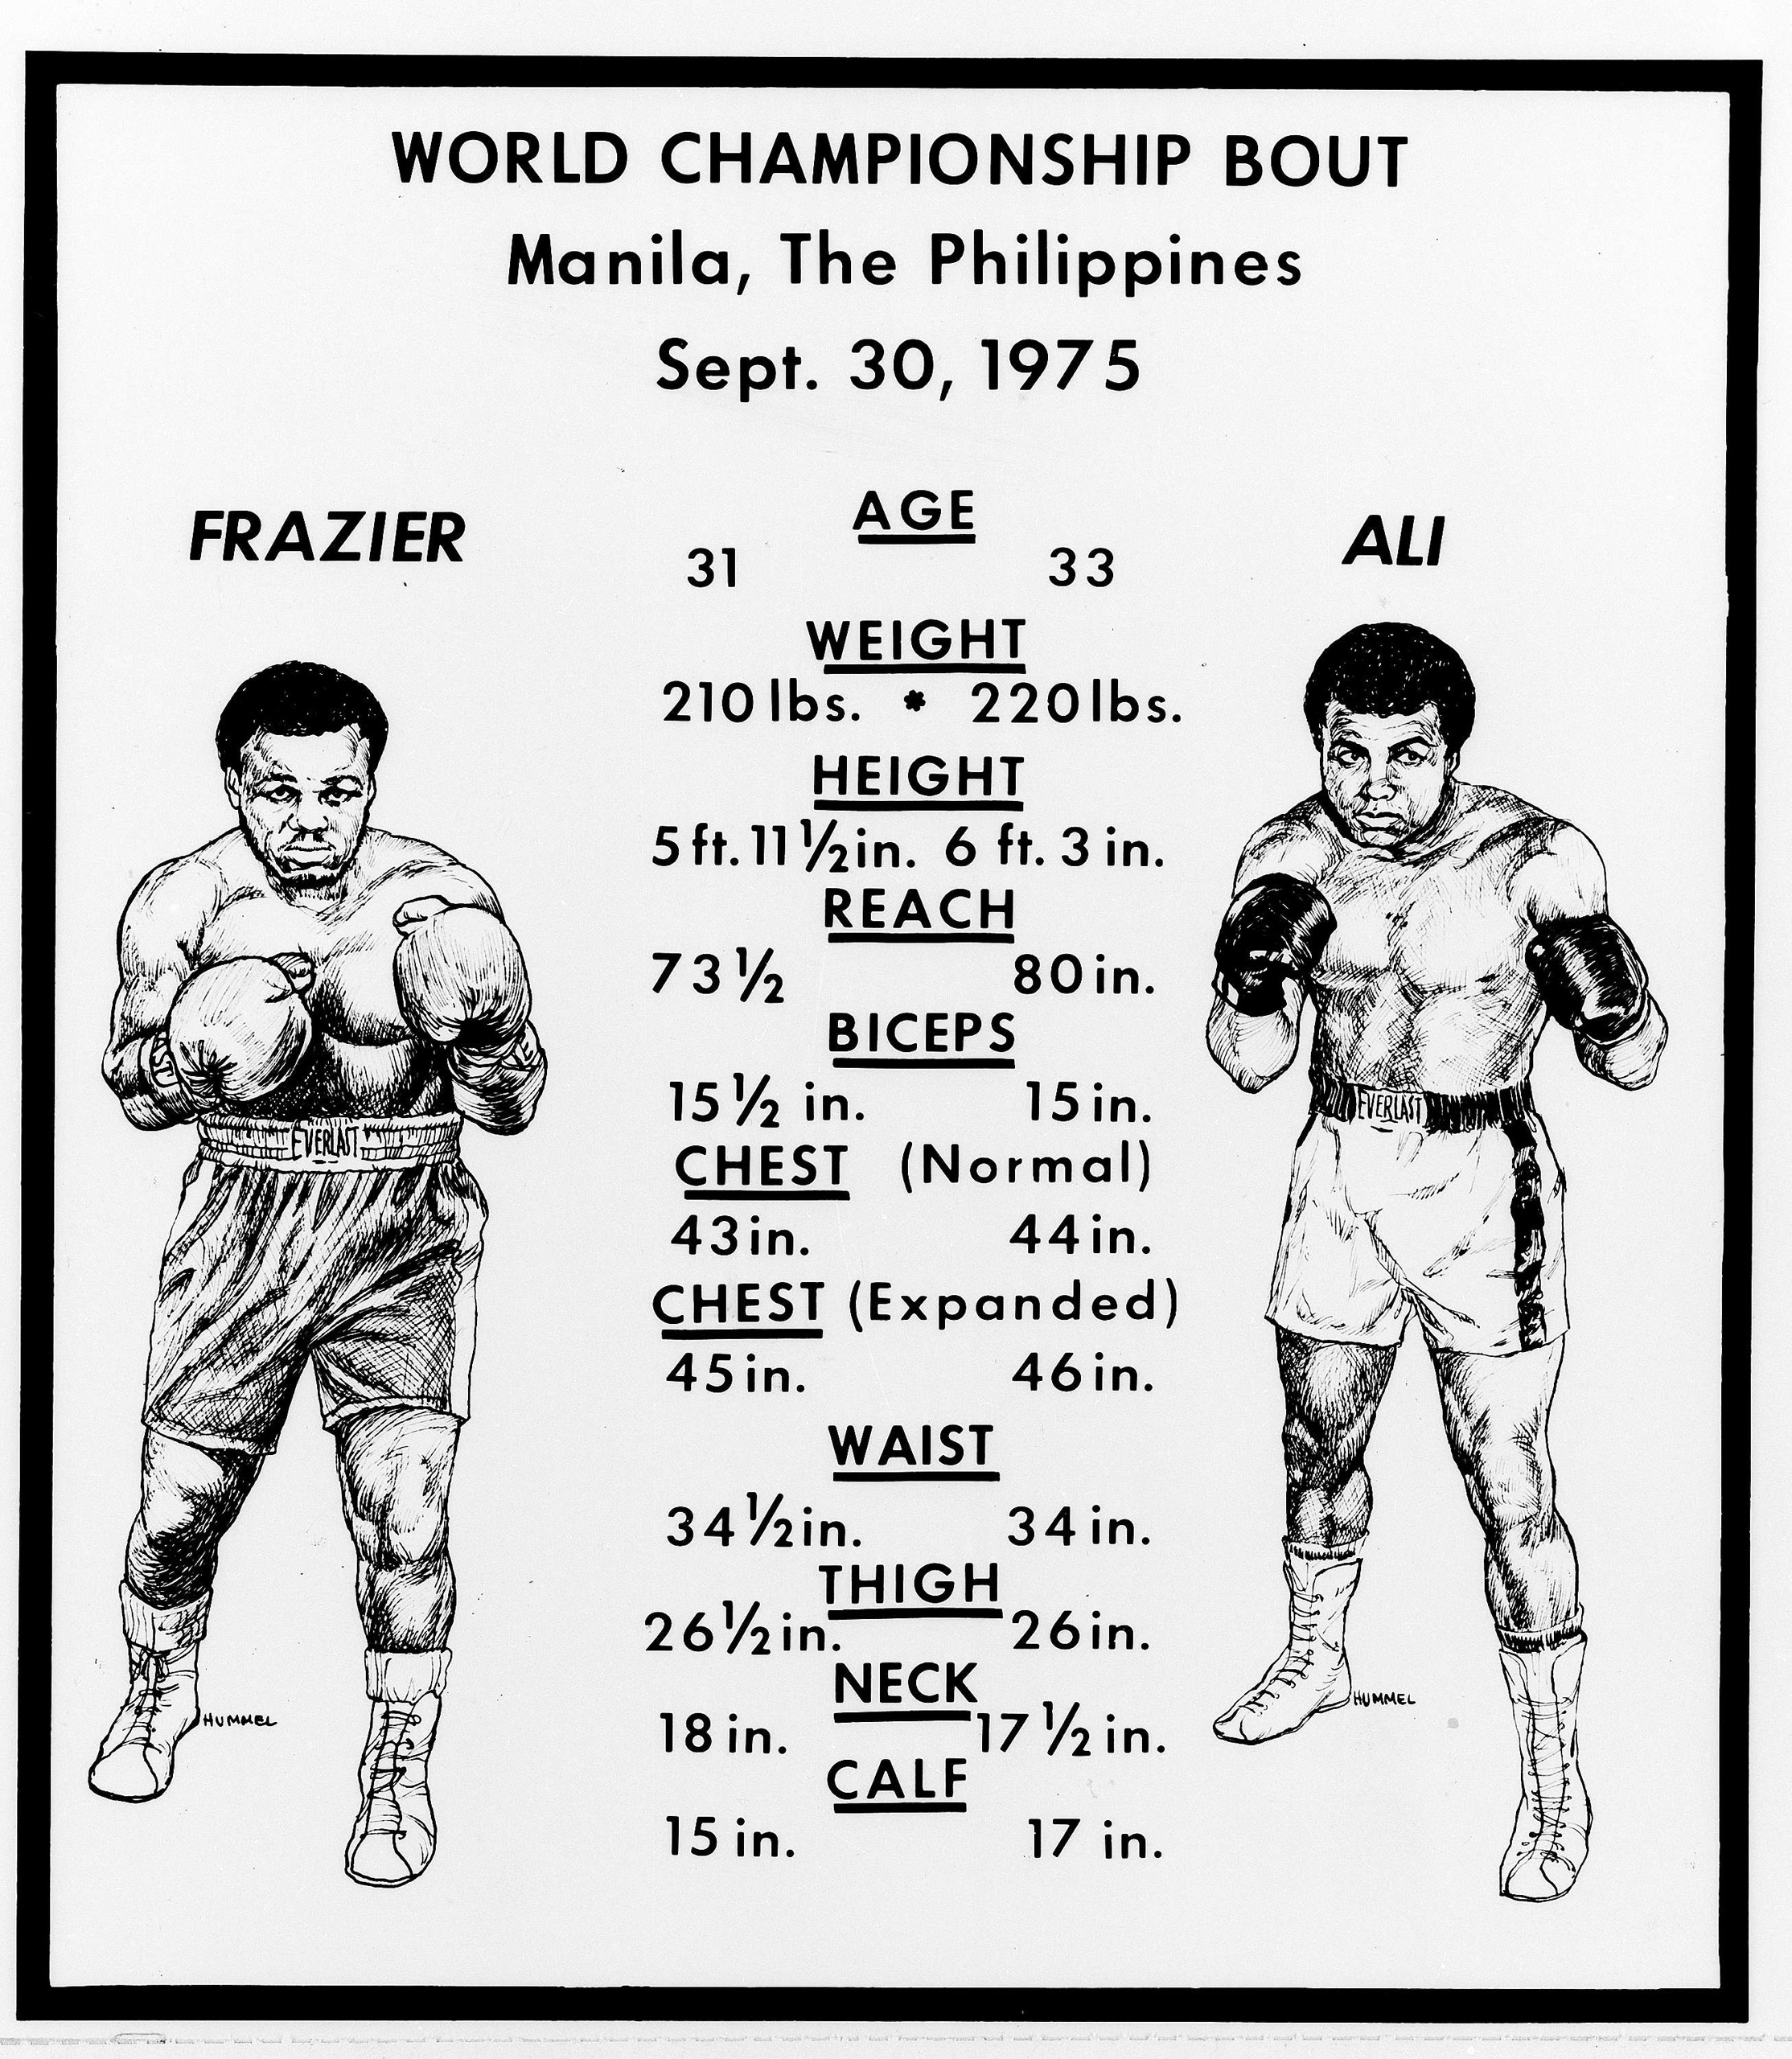 This chart compares the stats of boxers Joe Frazier, left, and Muhammad Ali. The heavyweights are due to meet in Manila, Sept. 30, 1975.